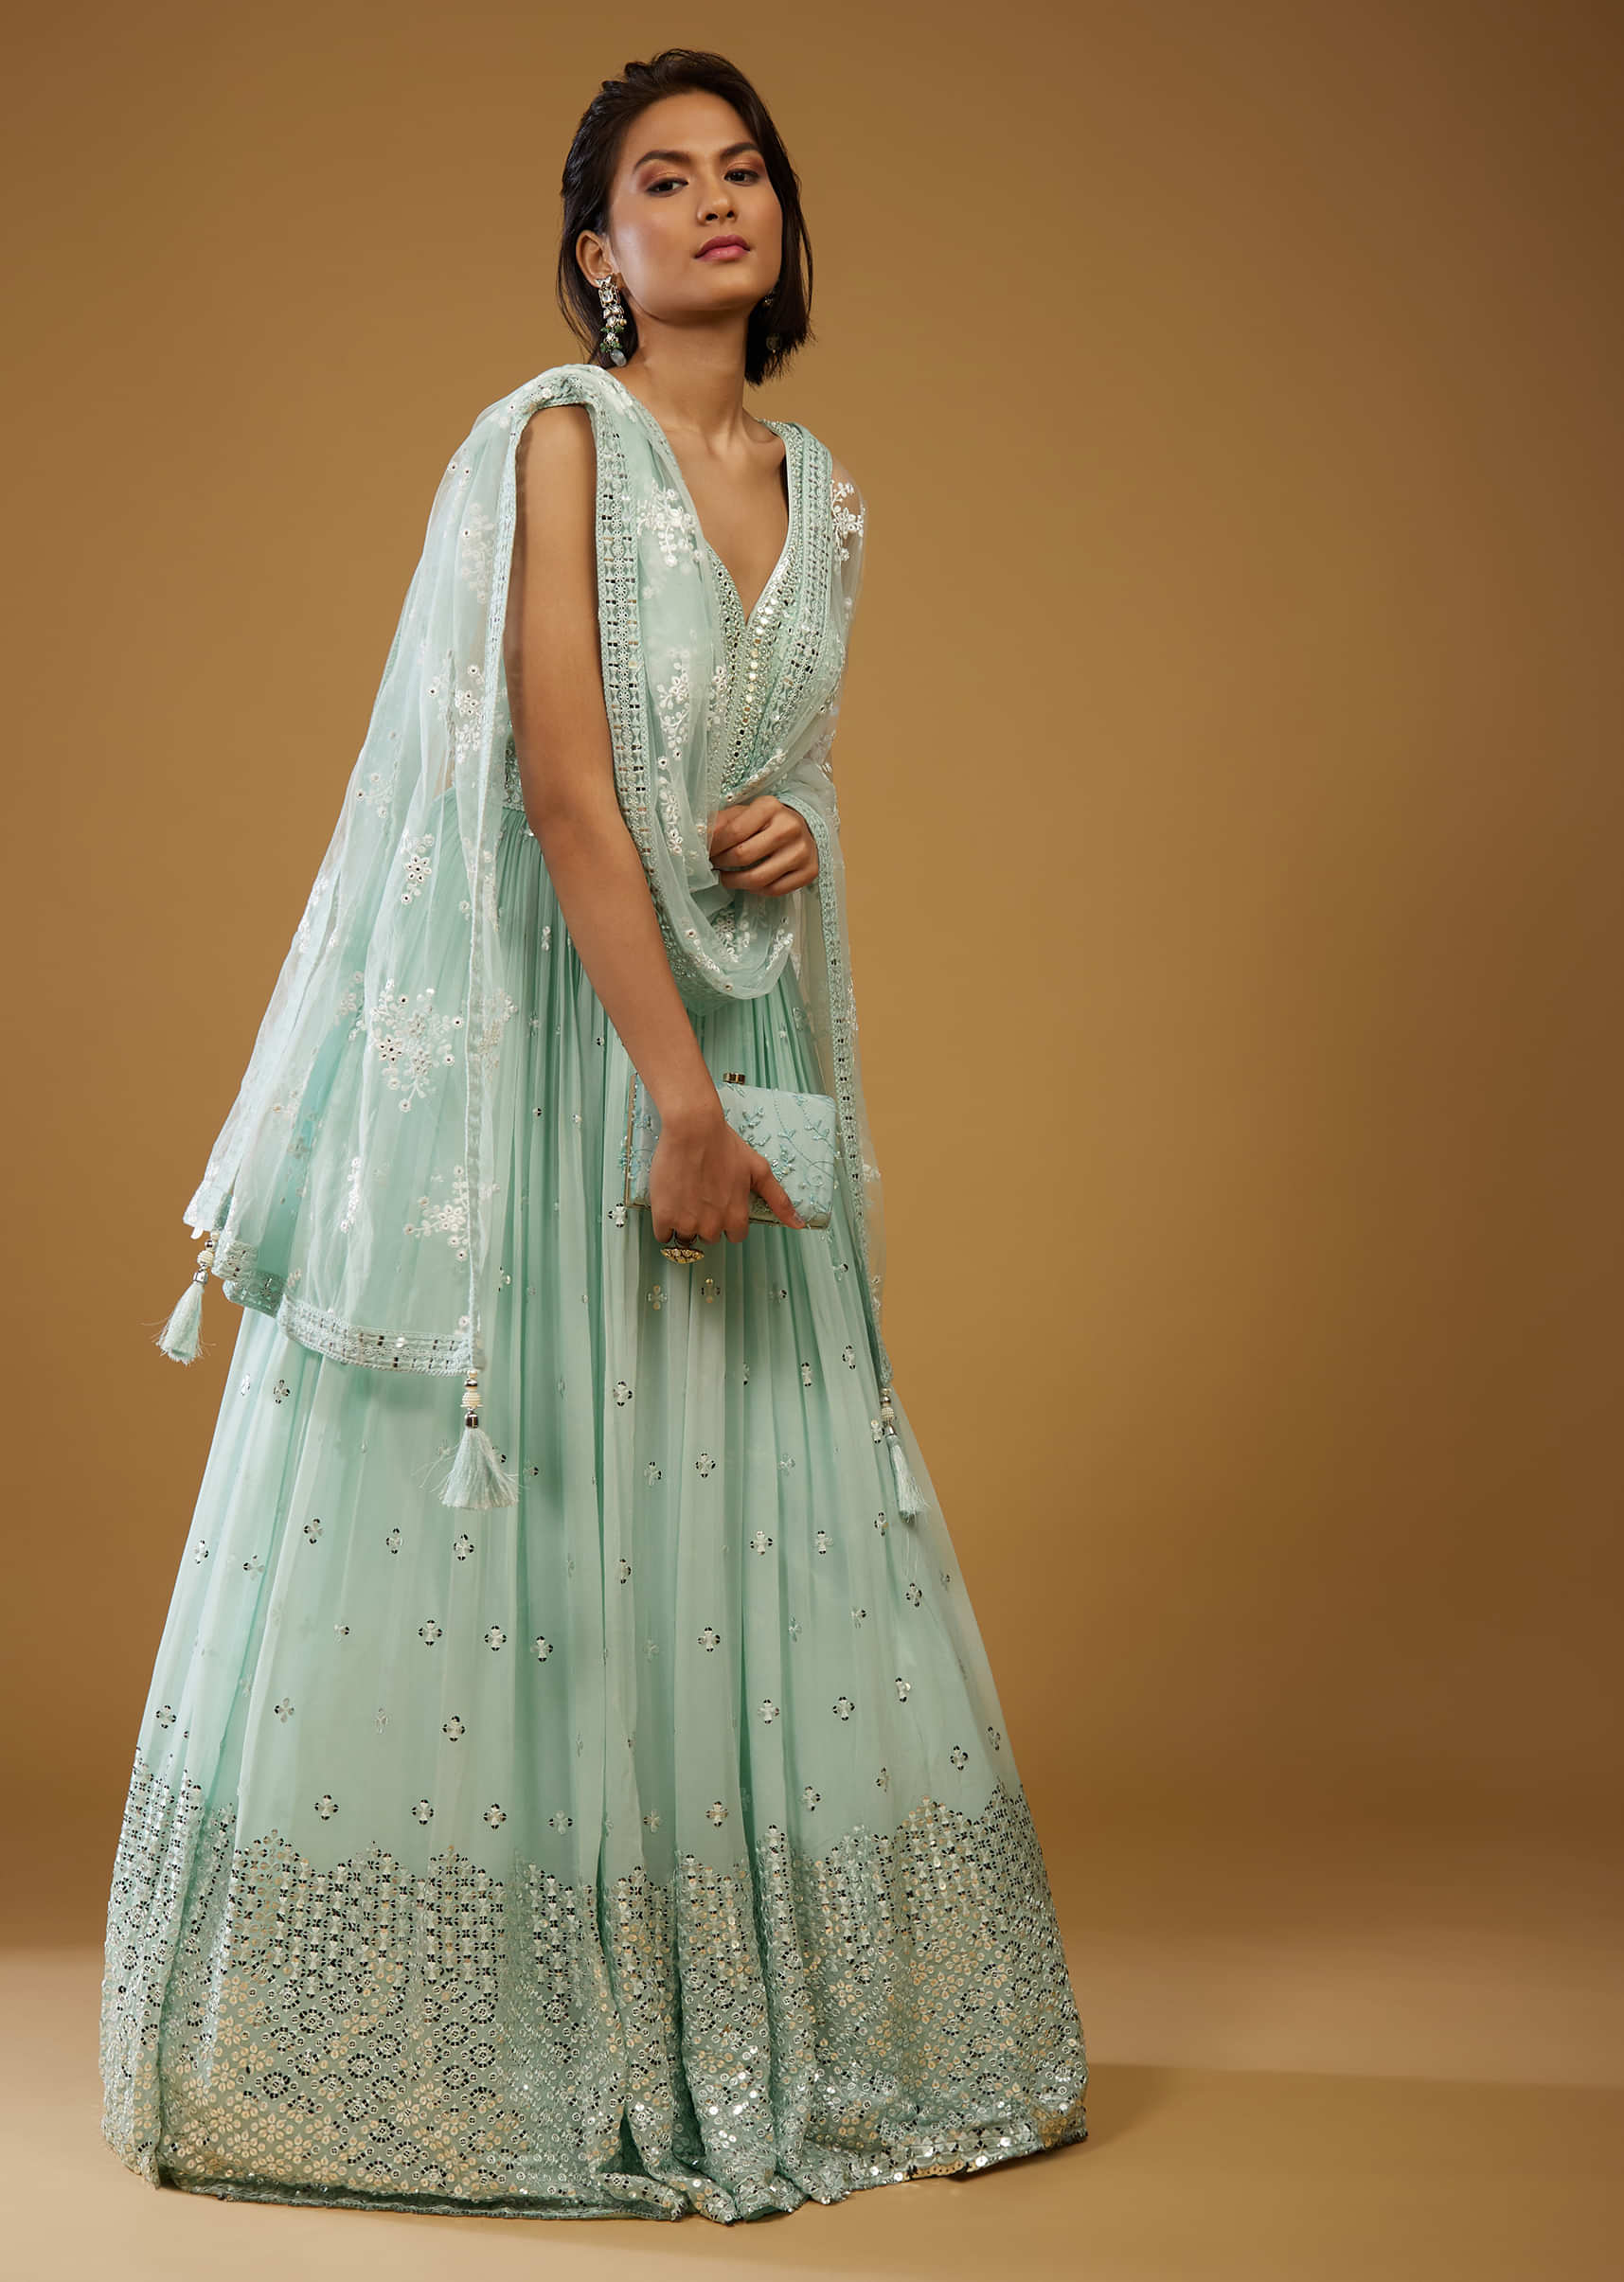 Powder Blue Anarkali Suit With Mirror Embroidery